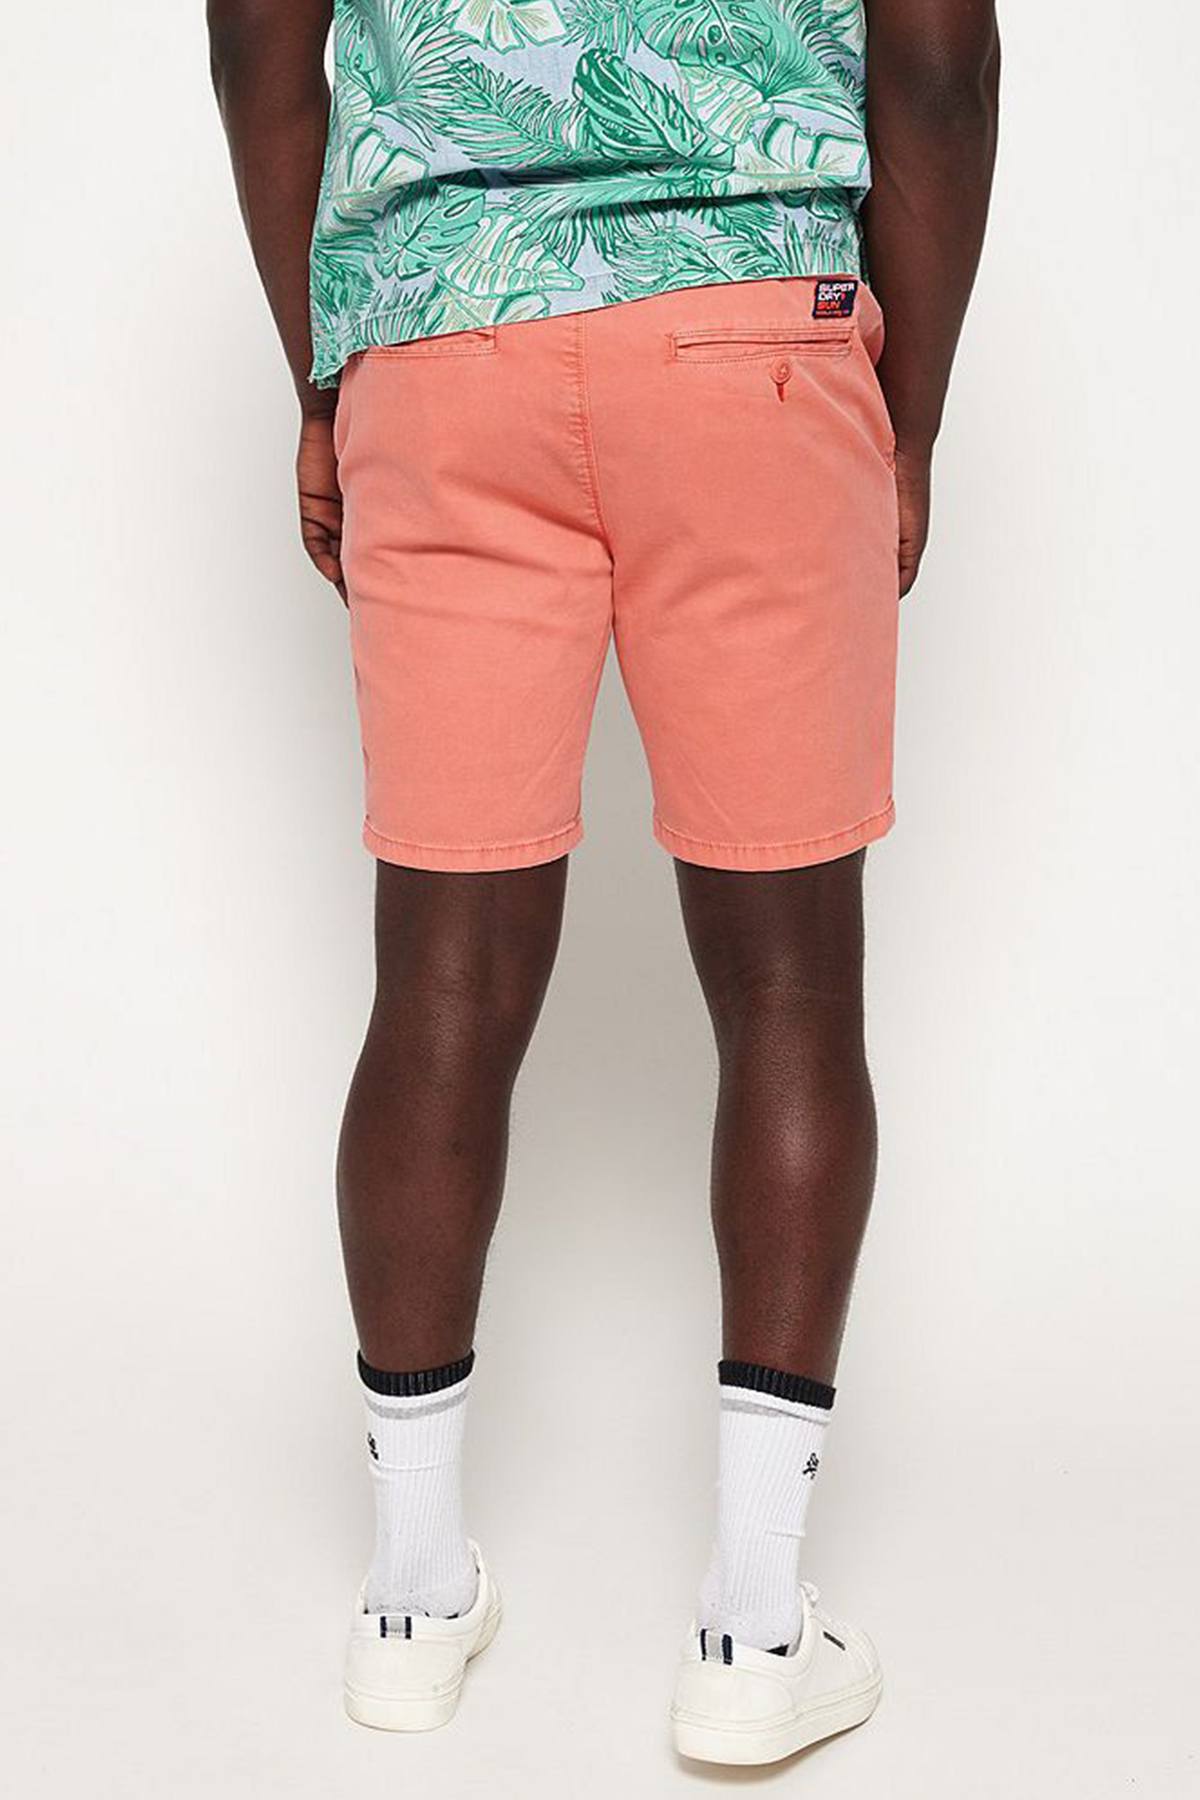 SuperDry Pomegranate Sunscorched Short